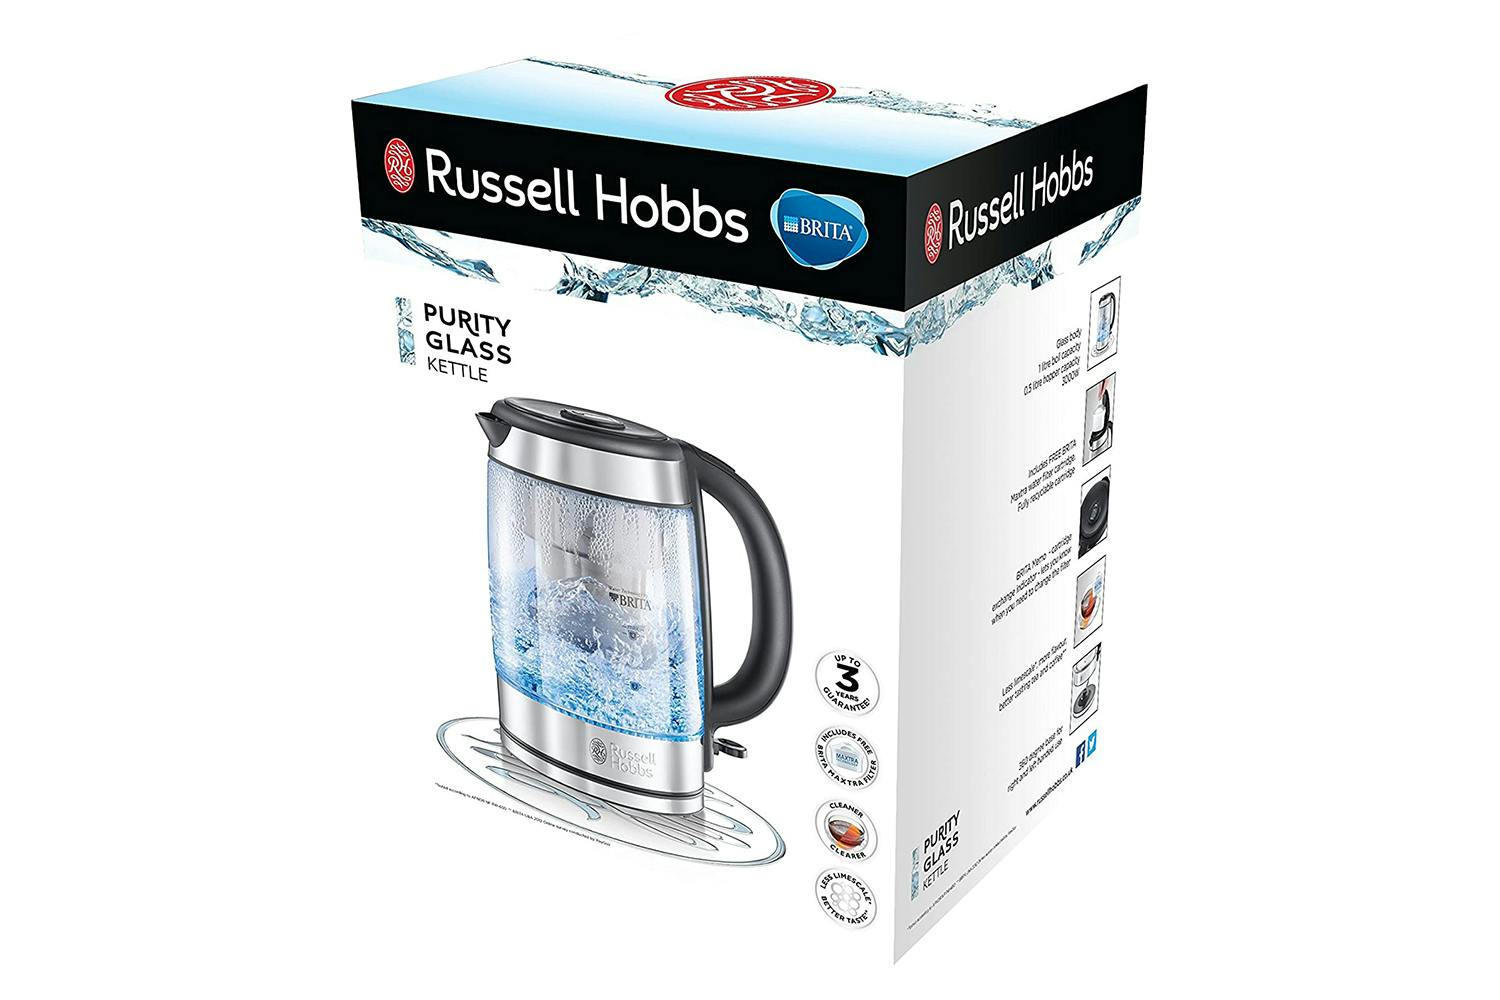 https://hniesfp.imgix.net/8/images/detailed/219/kettle_russell_hobbs_20760-10_6.jpg?fit=fill&bg=0FFF&w=1500&h=1000&auto=format,compress